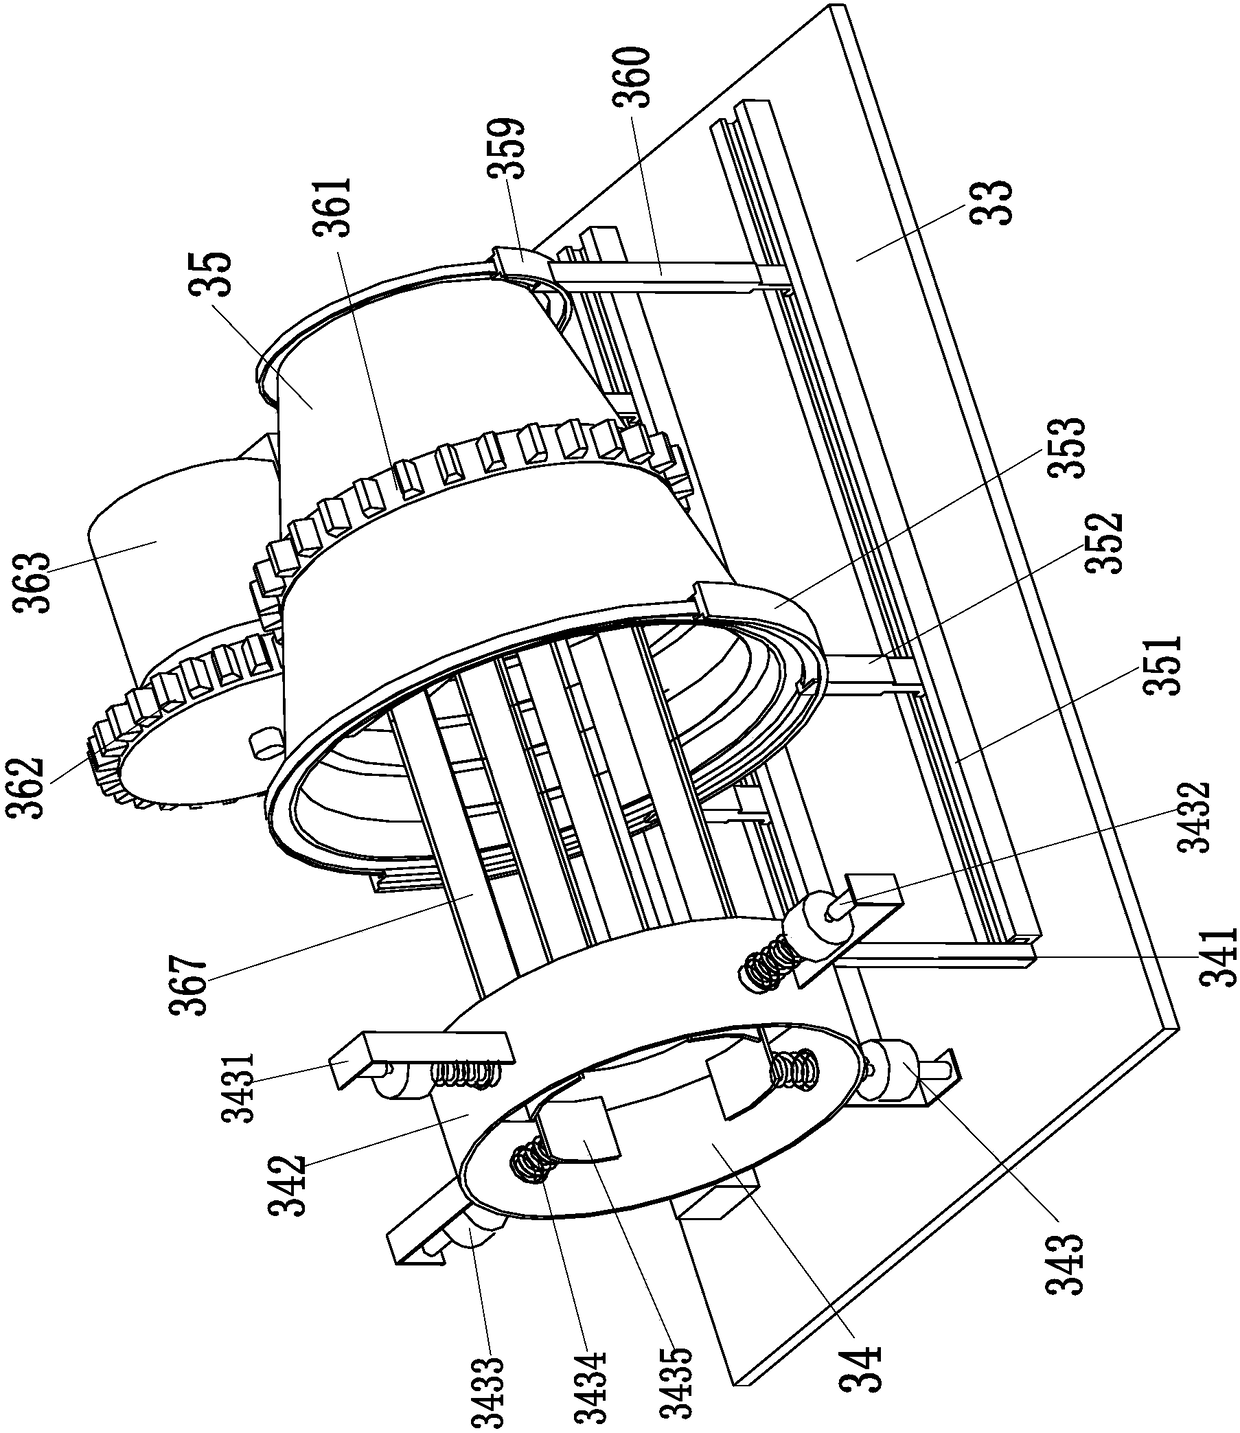 Intelligent connection equipment for reinforcement sleeve for building